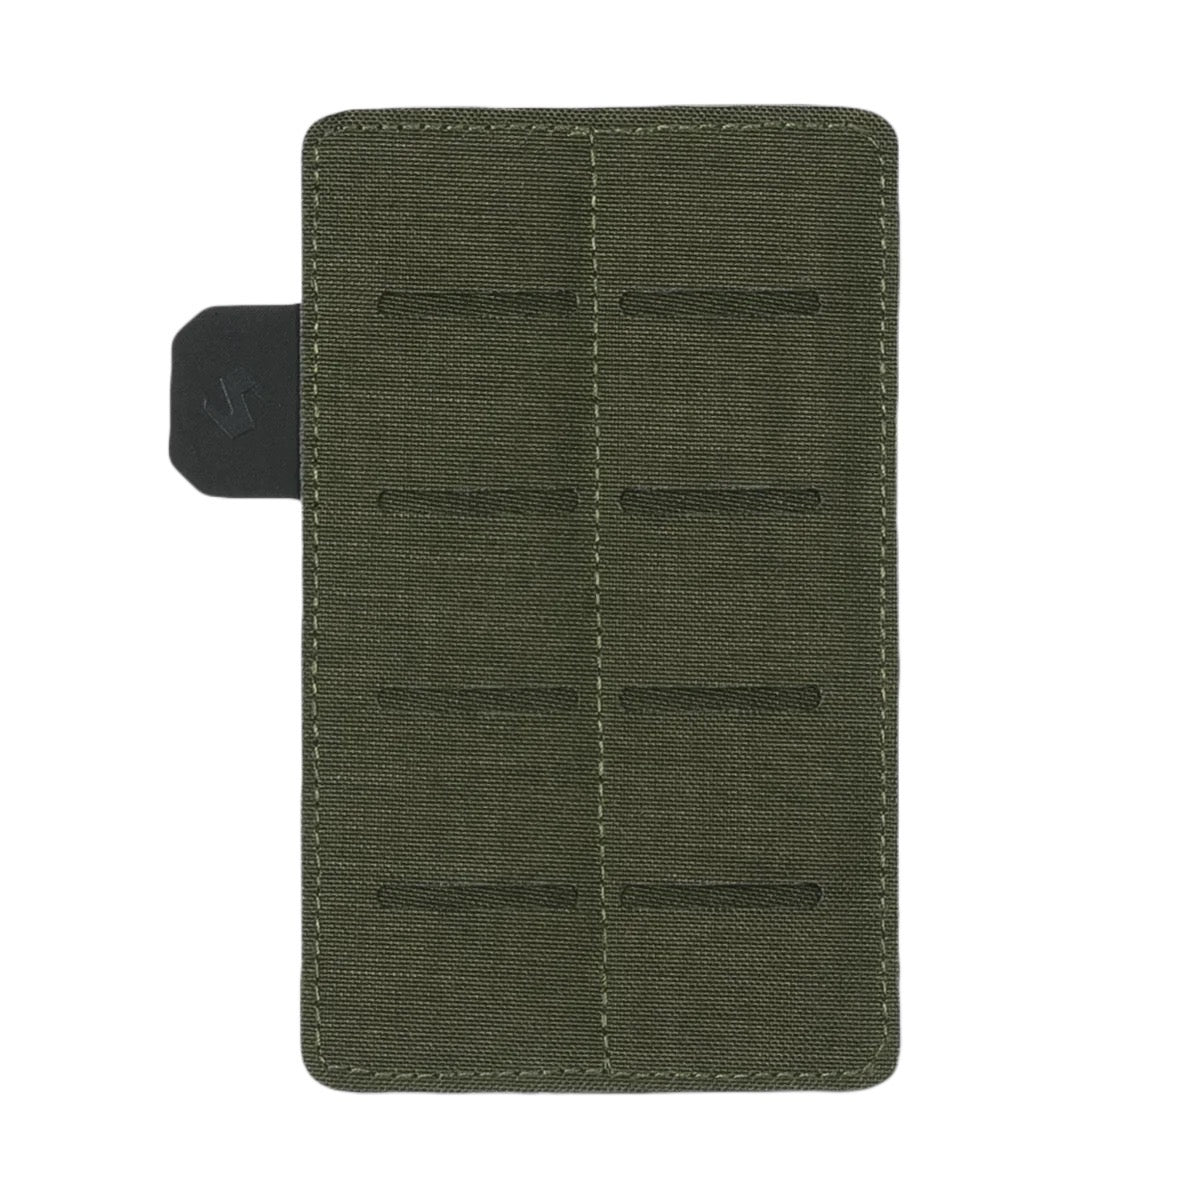 STOIRM Small Molle Panel - Olive Green